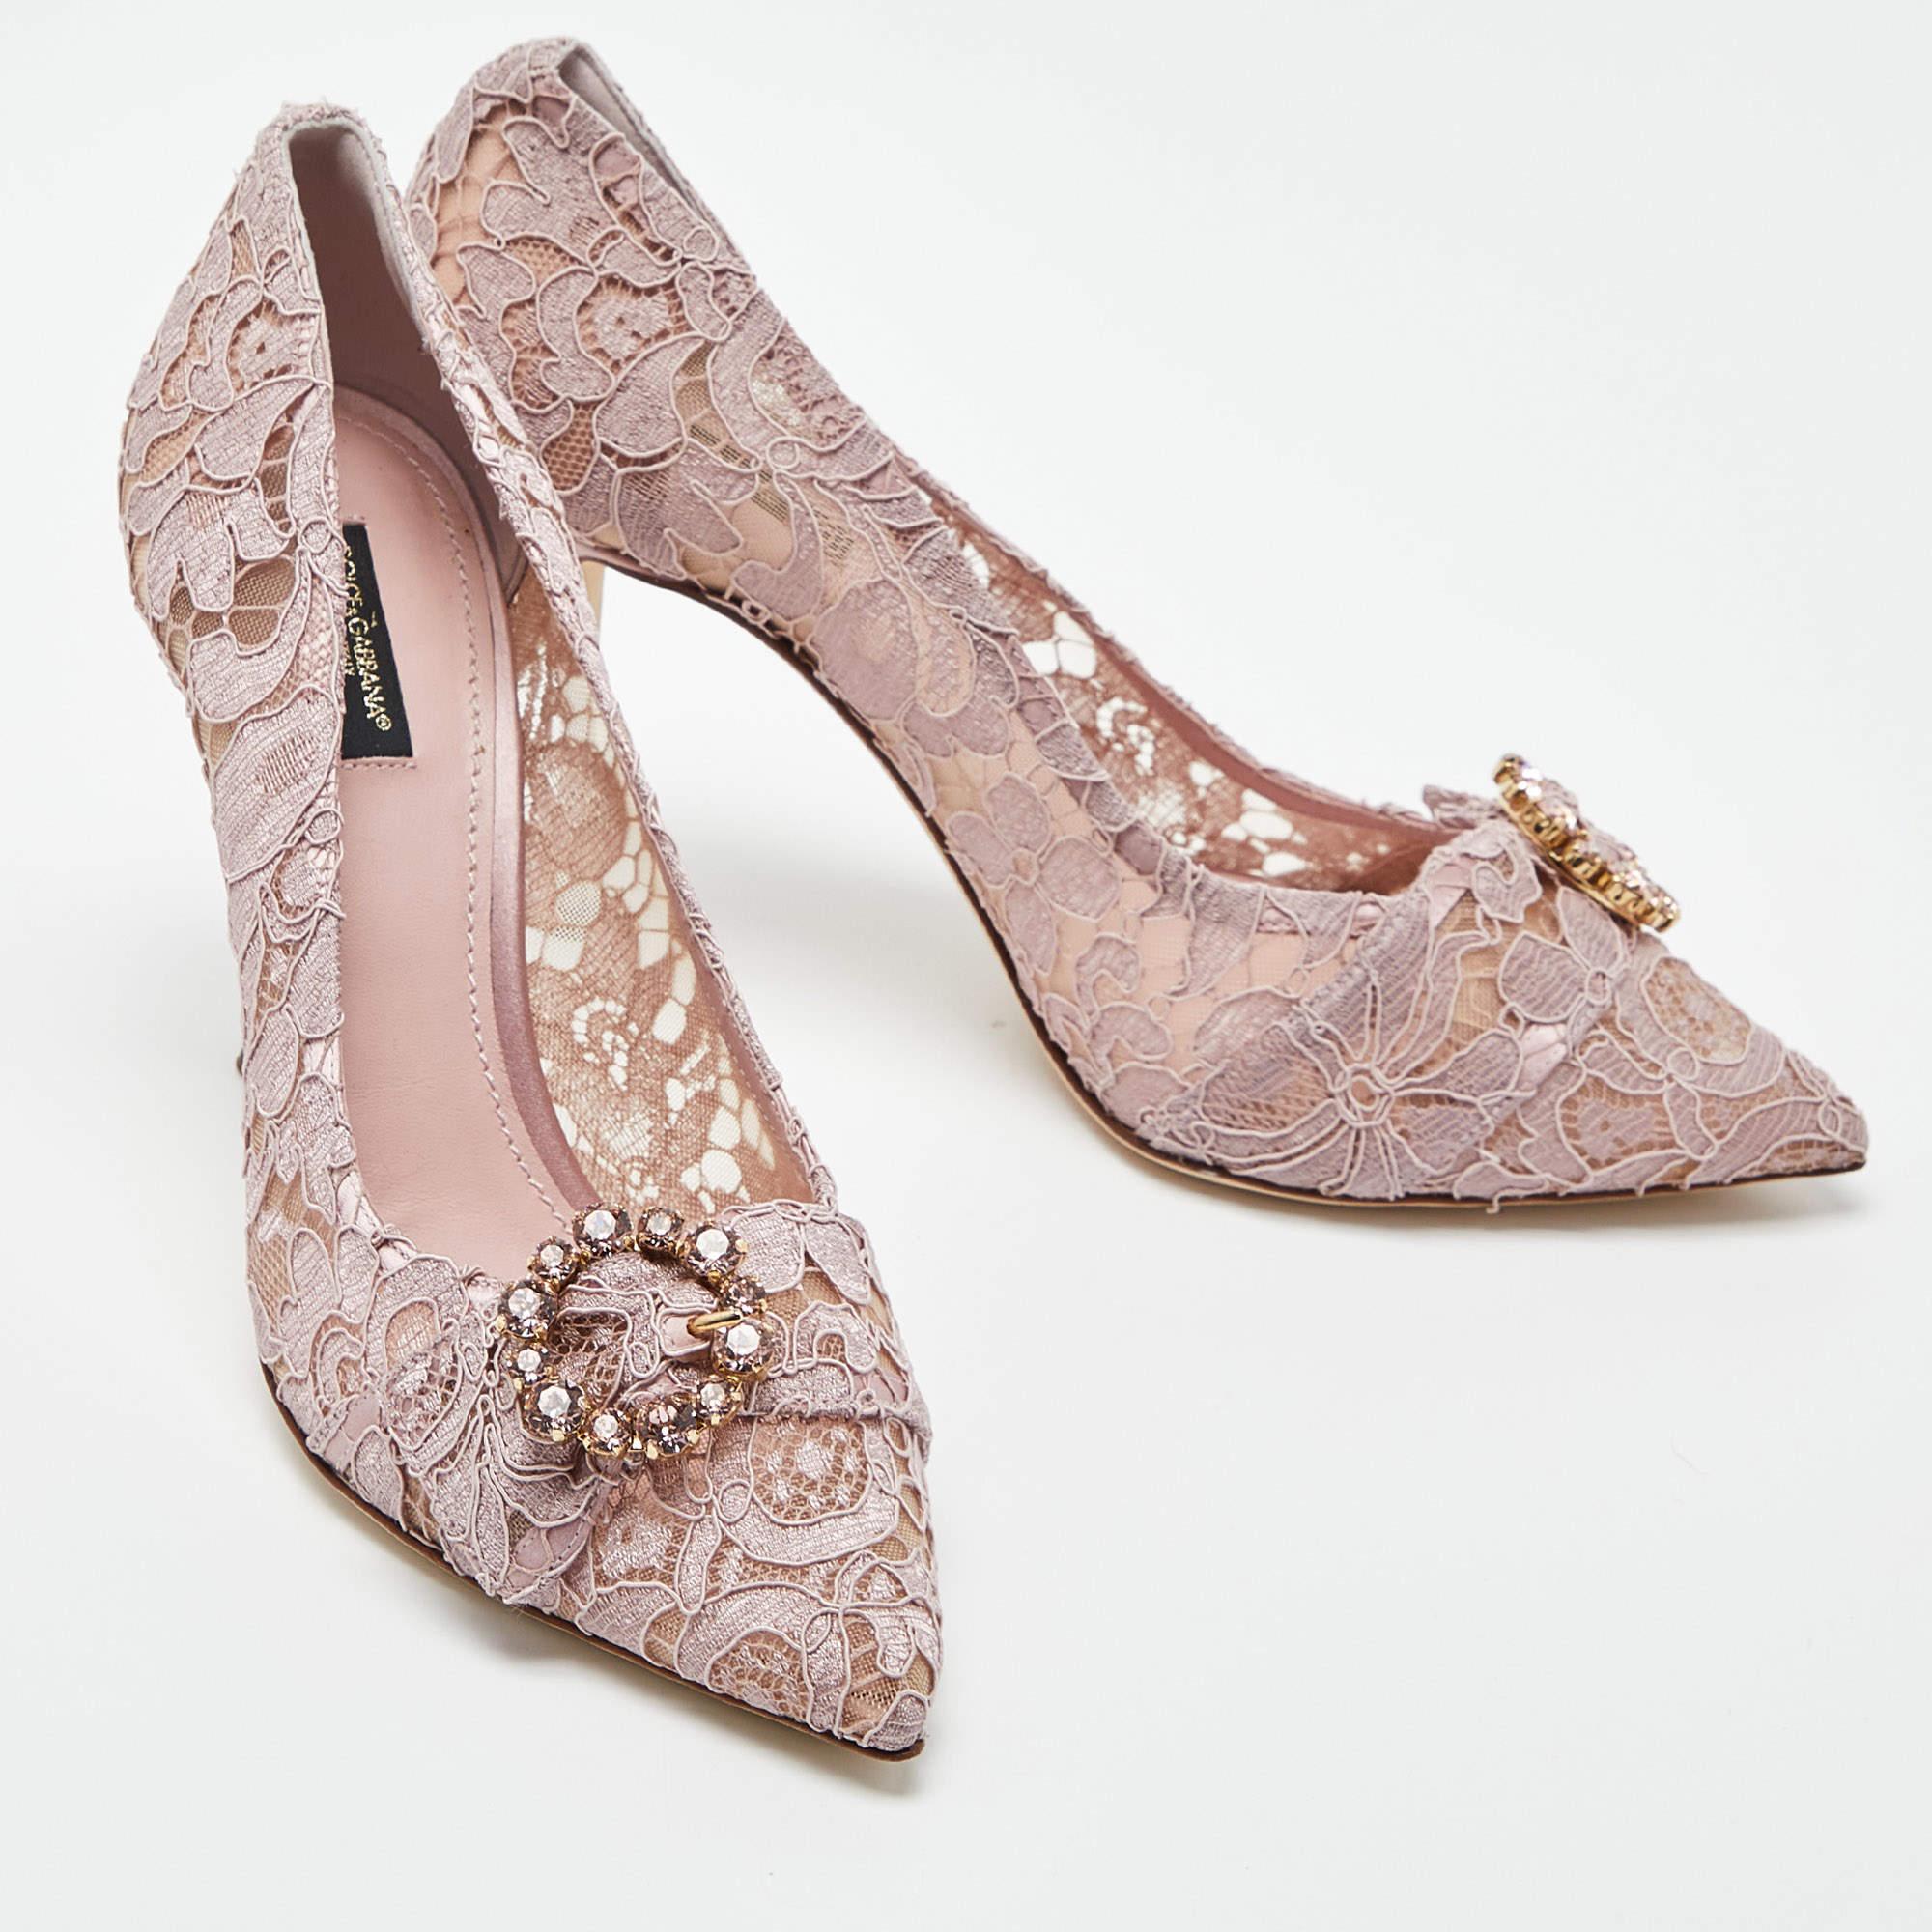 Dolce & Gabbana Lilac Lace Crystal Embellishment Pointed Toe Pumps Size 41 1